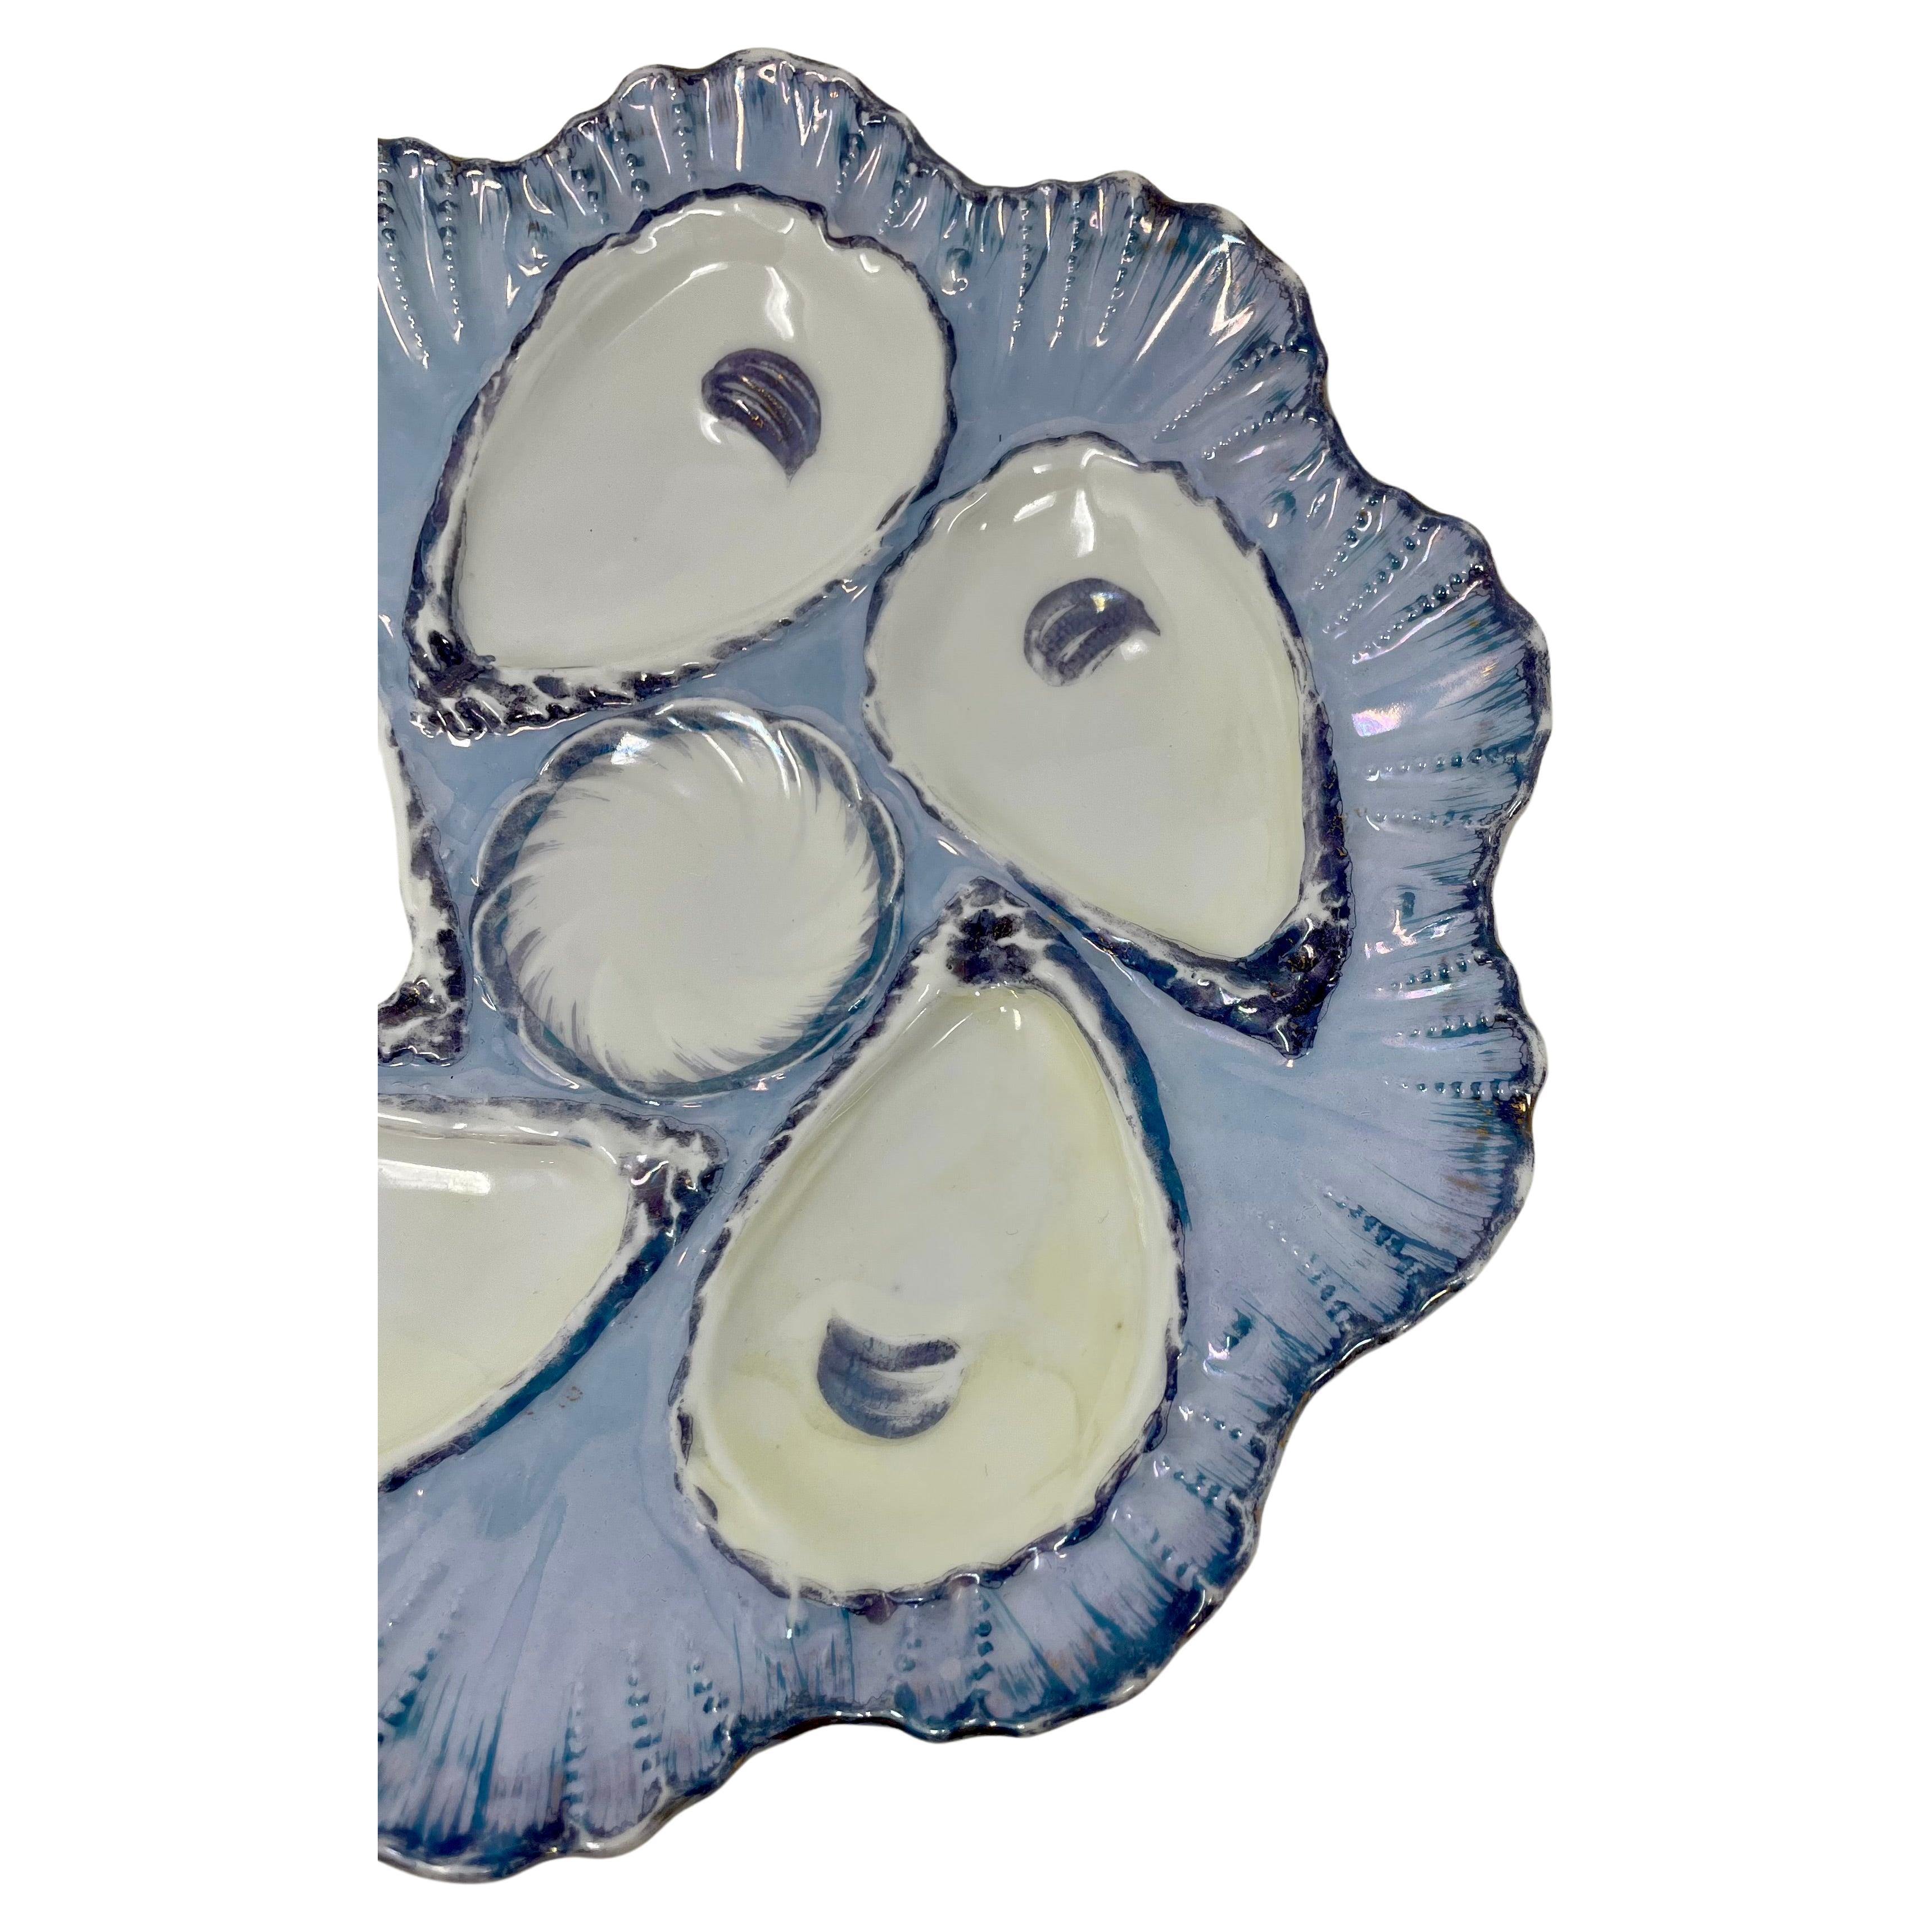 Antique continental hand-painted porcelain oyster plate, circa 1880-1890.
Beautiful and unusual colors of periwinkle and lavender blue